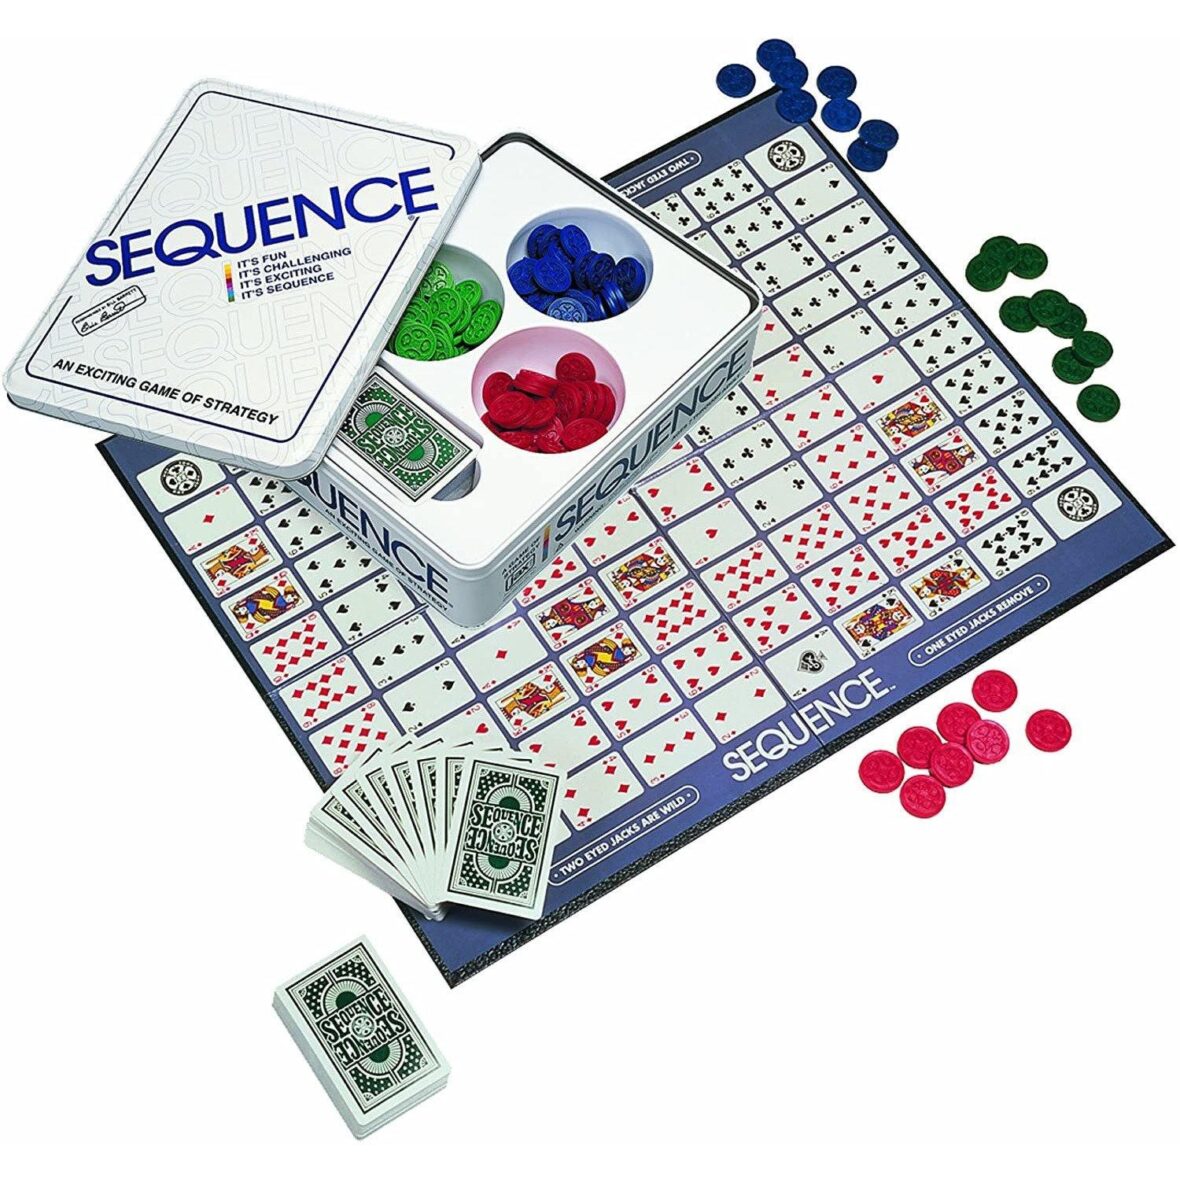 sequence-game-with-folding-board-cards-and-chips-bumbletoys-8-13-years-card-and-board-games-puzzle-and-board-and-card-games-toy-land-unisex-2